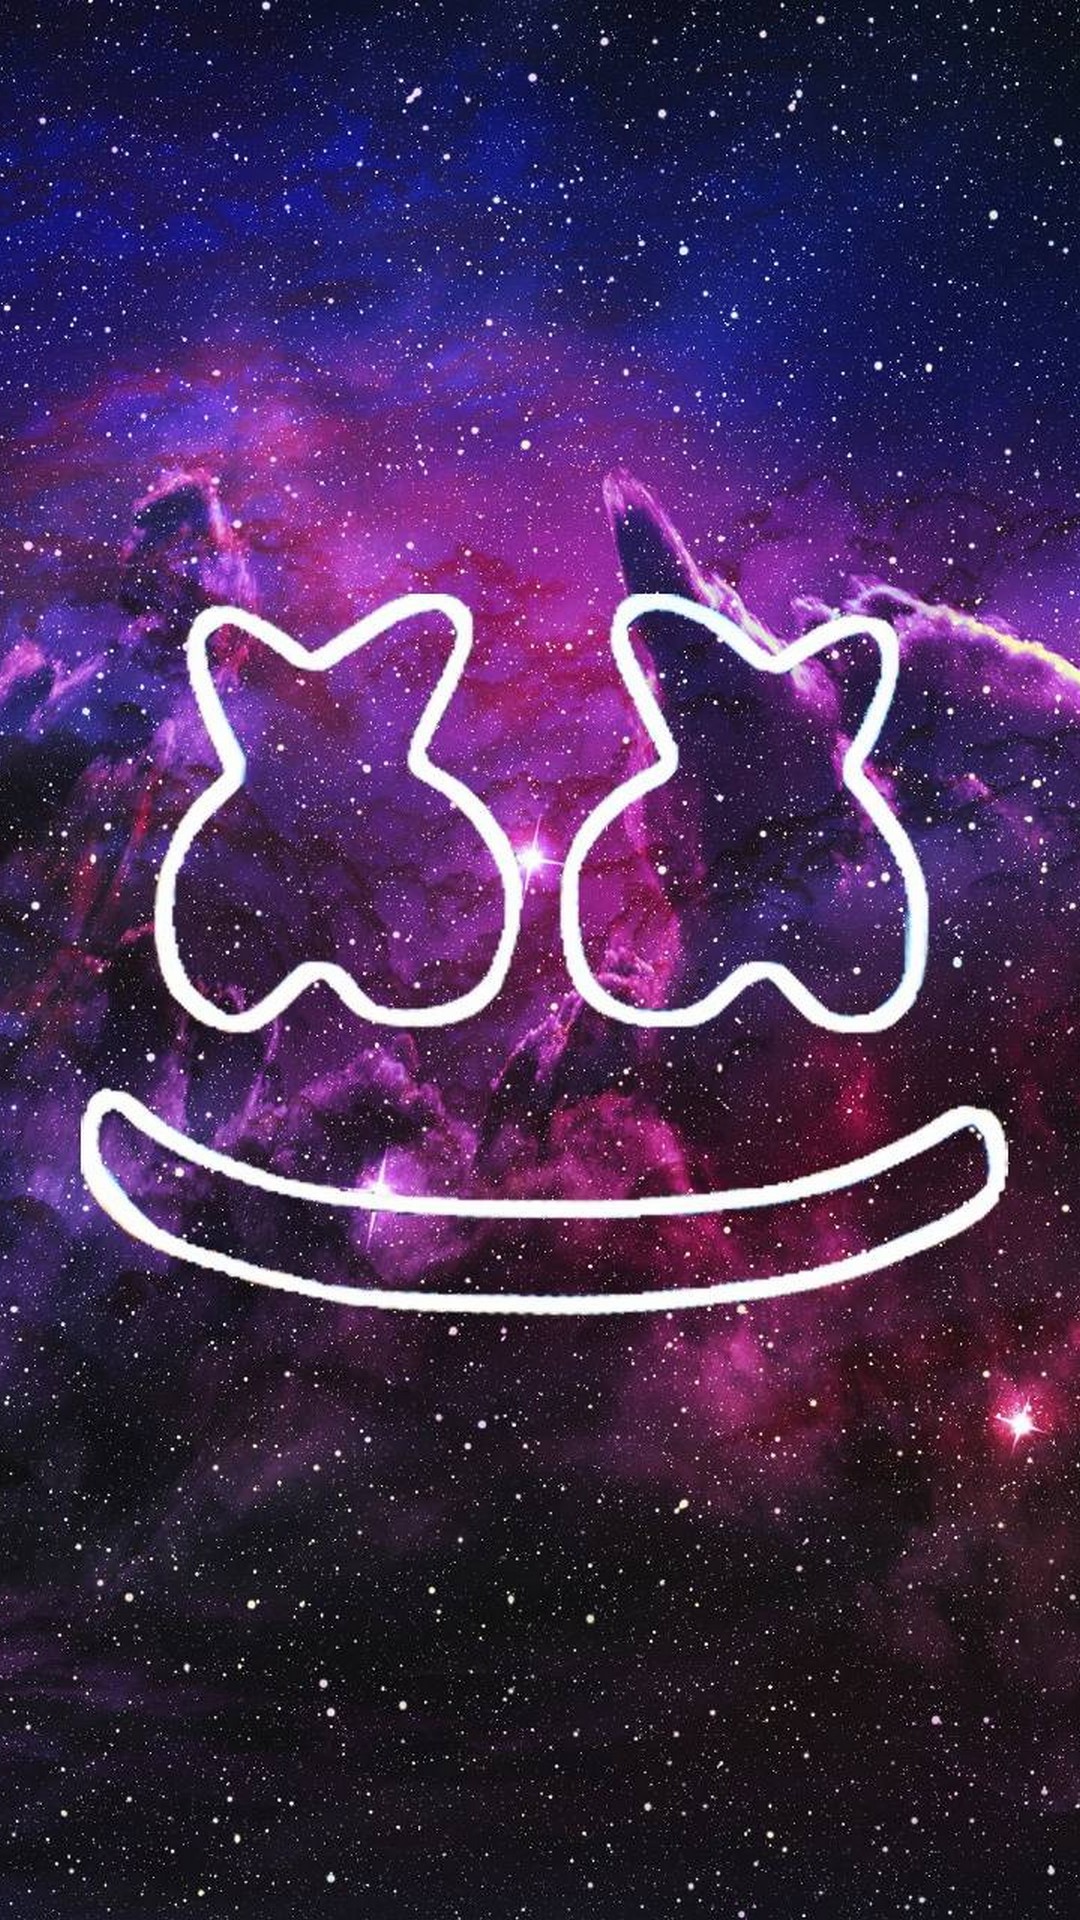 Marshmello Android Wallpaper With high-resolution 1080X1920 pixel. You can use this wallpaper for your Android backgrounds, Tablet, Samsung Screensavers, Mobile Phone Lock Screen and another Smartphones device